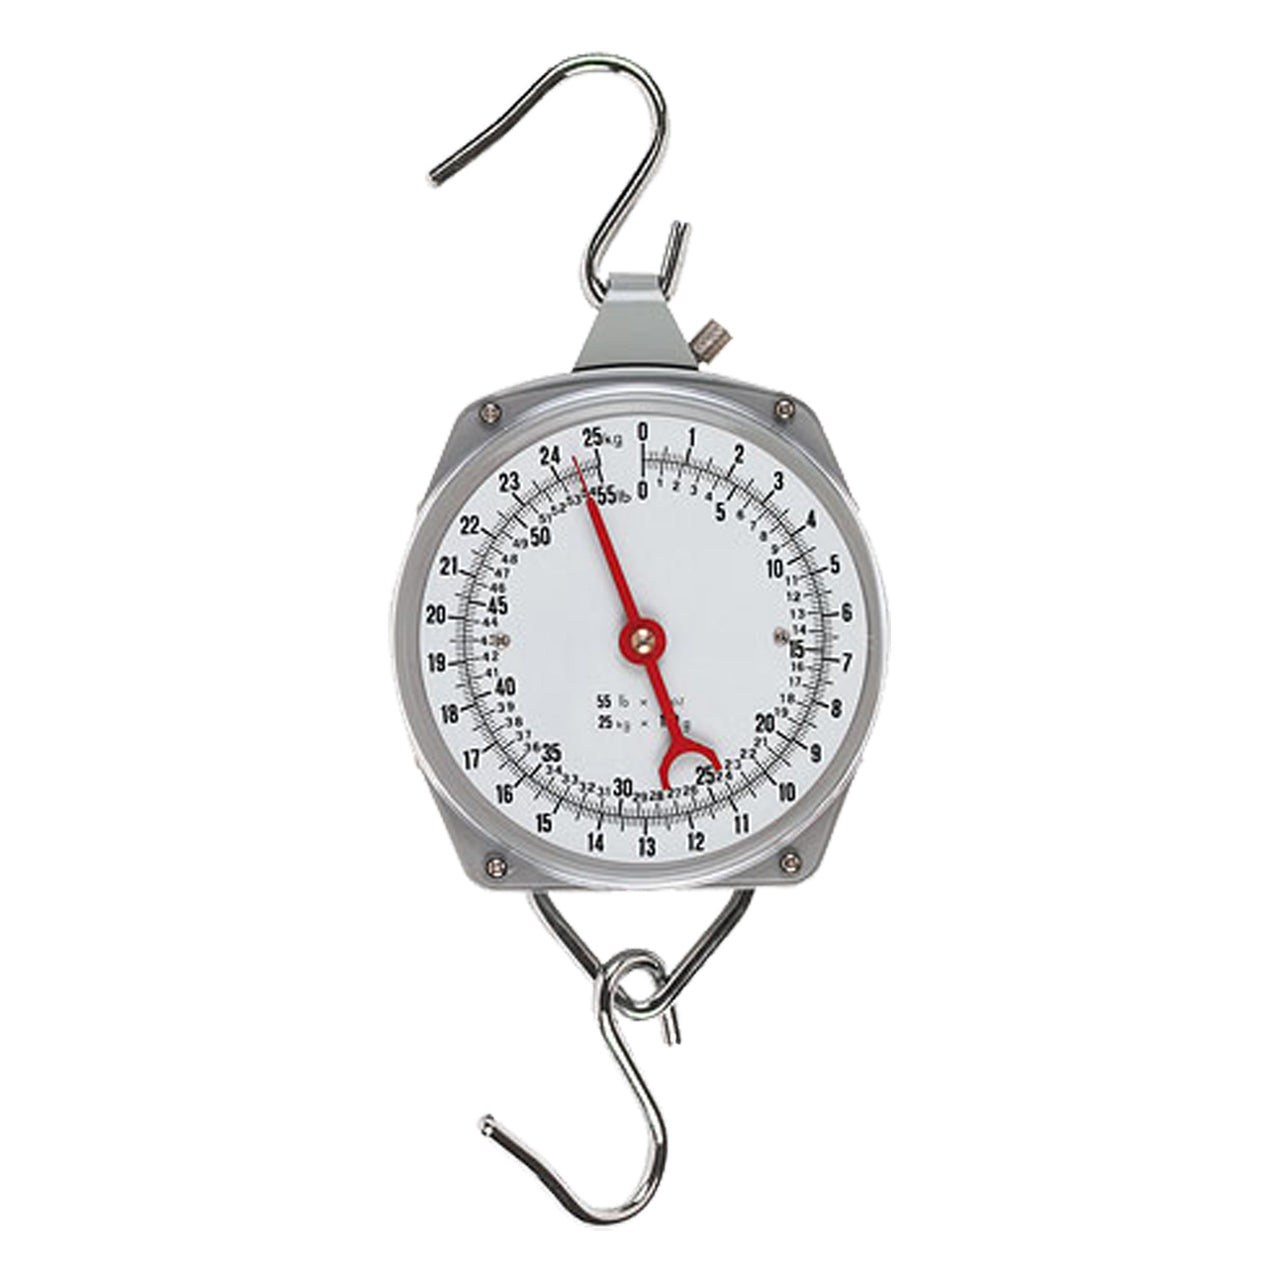 Kerbl Suspended Dial Balance 25 Kg - Weigh Slings Scales Kerbl - Canada